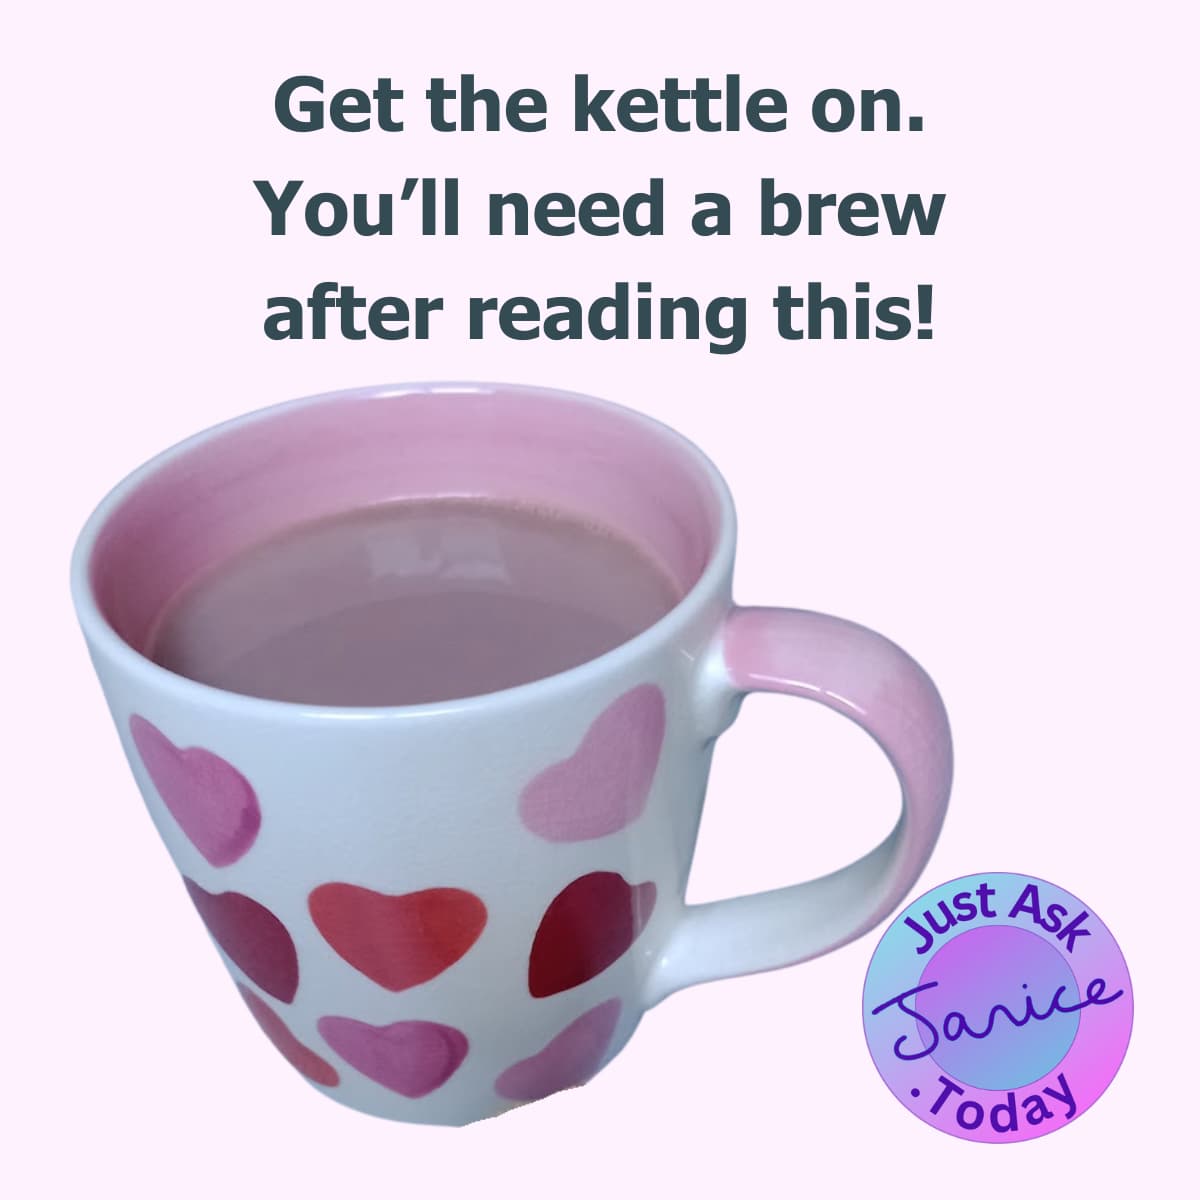 A cup of hot chocolate with the text Get the kettle on. You'll need a brew after reading this. The Just Ask Janice Today logo is in the corner.